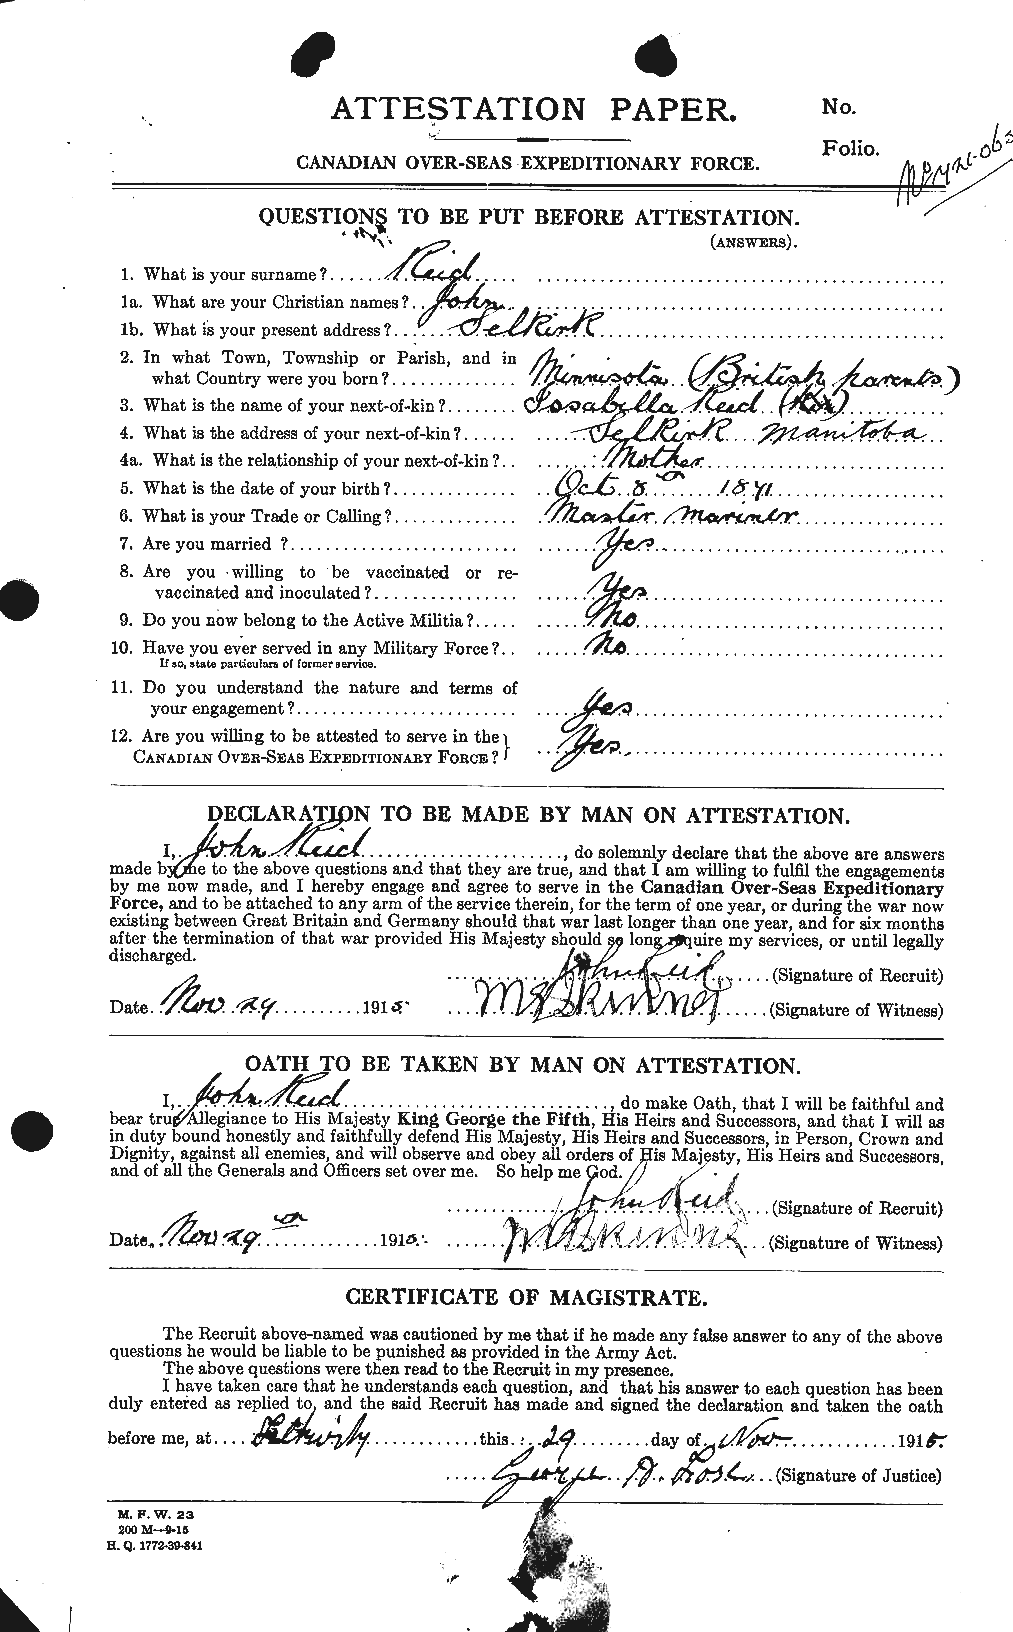 Personnel Records of the First World War - CEF 598814a